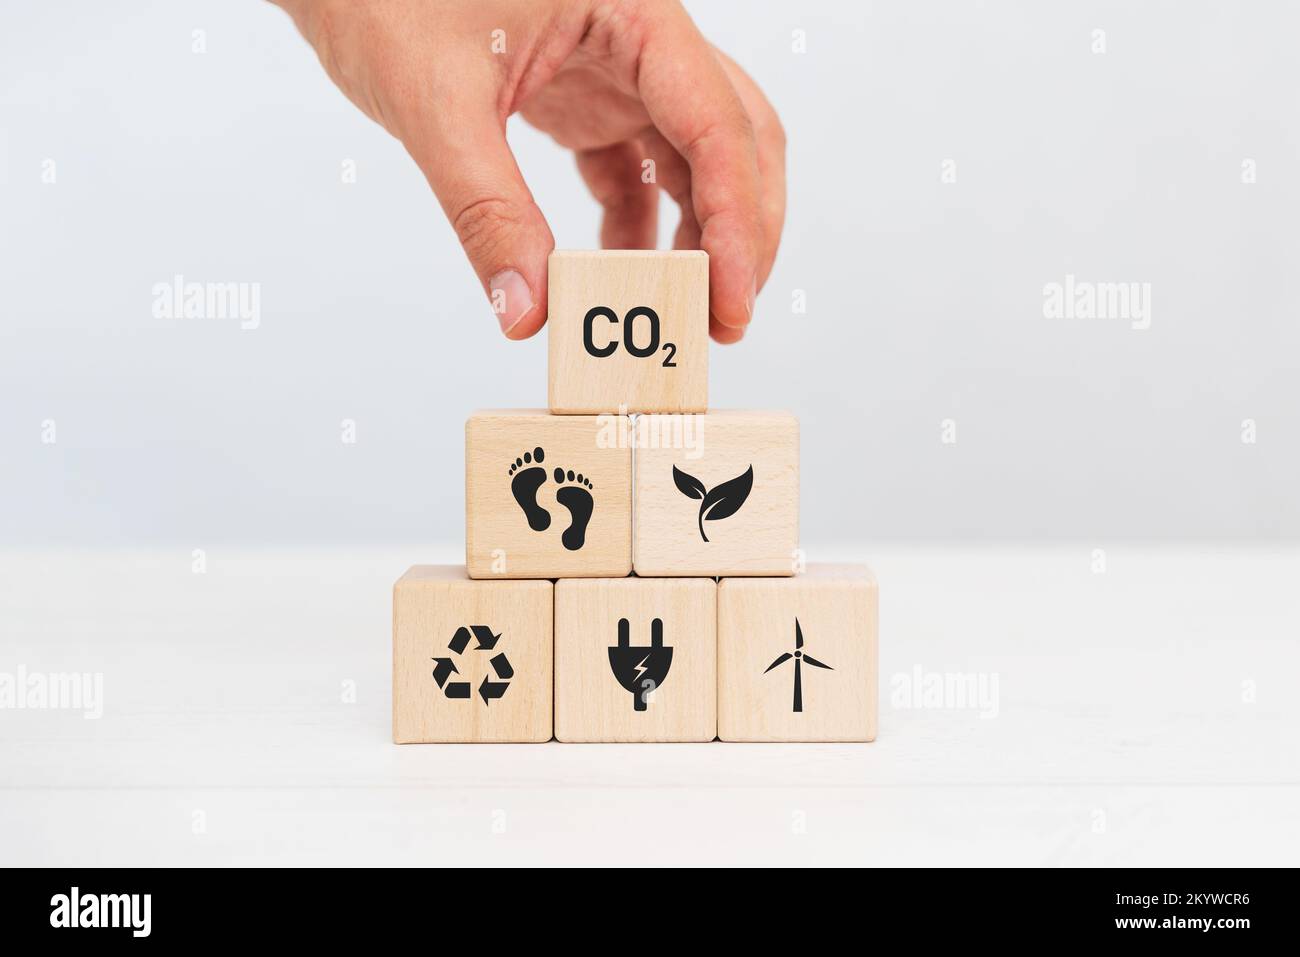 Carbon Dioxide, carbon footprint concept with wooden blocks Stock Photo